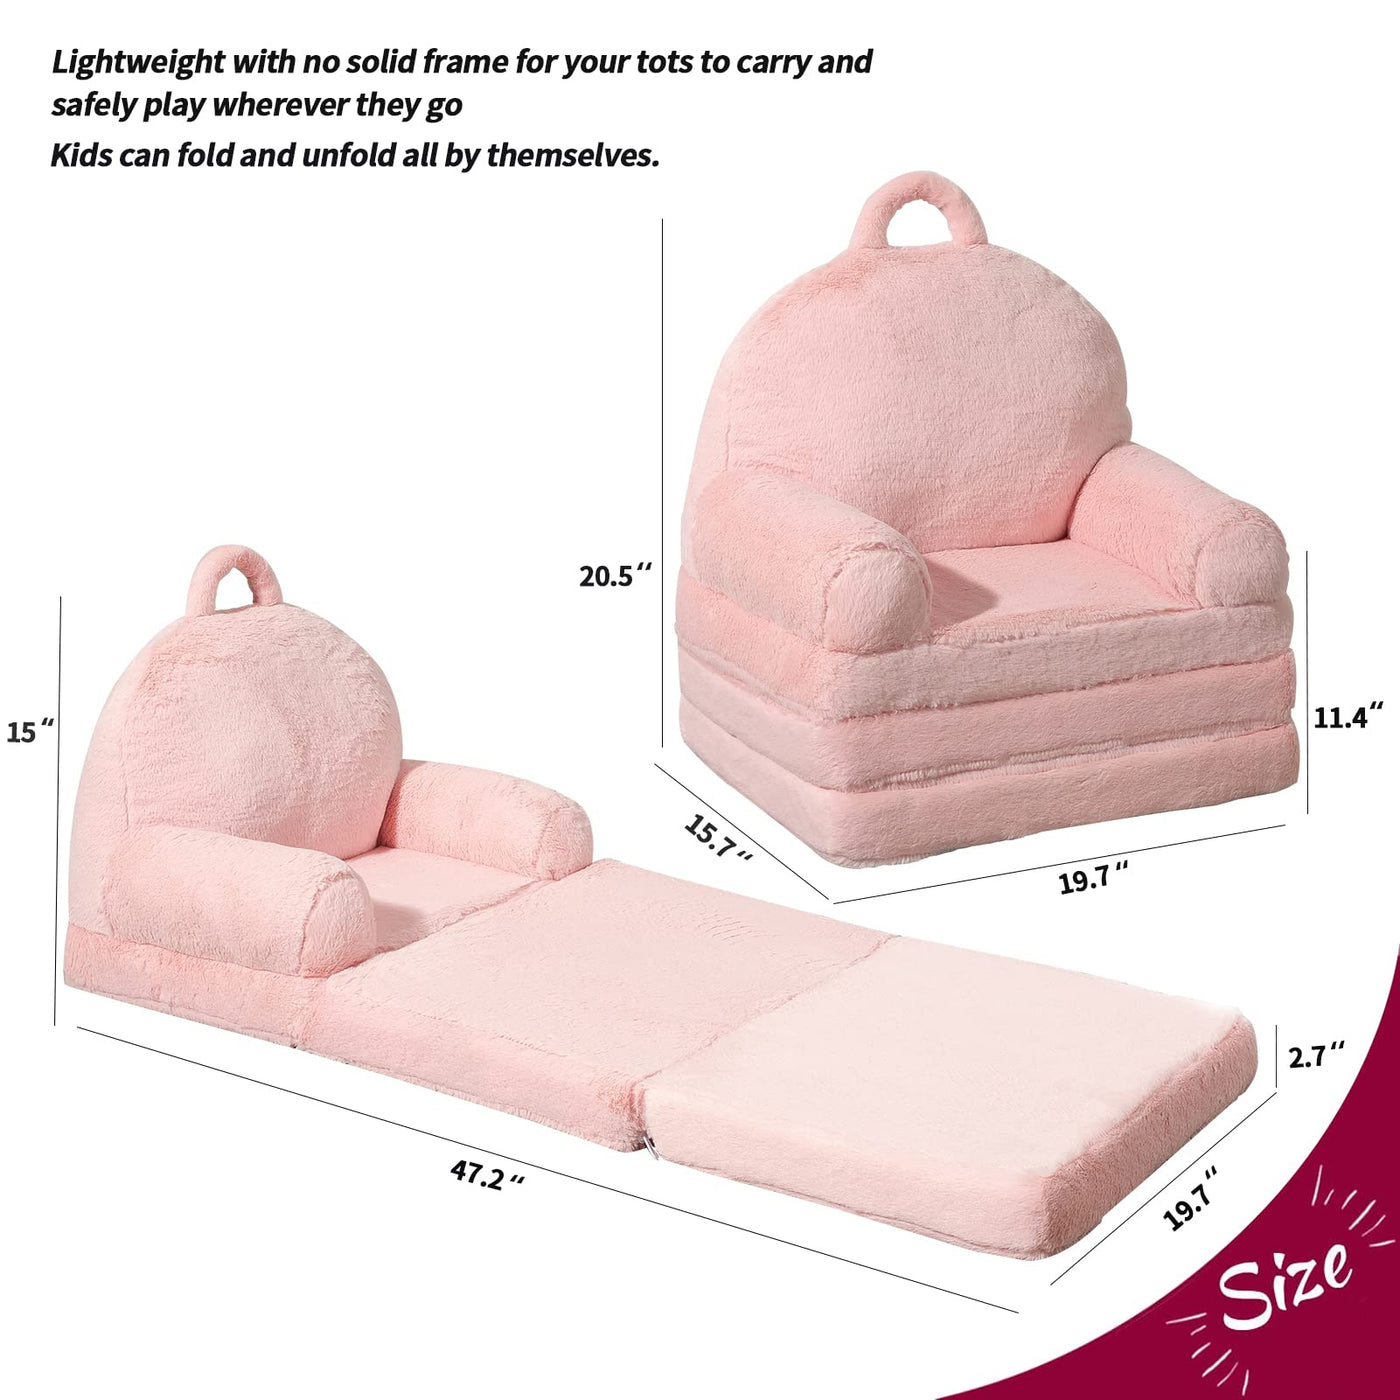 MAXYOYO Plush Foldable Kids Sofa, Children Couch Backrest Armchair Bed, Pink